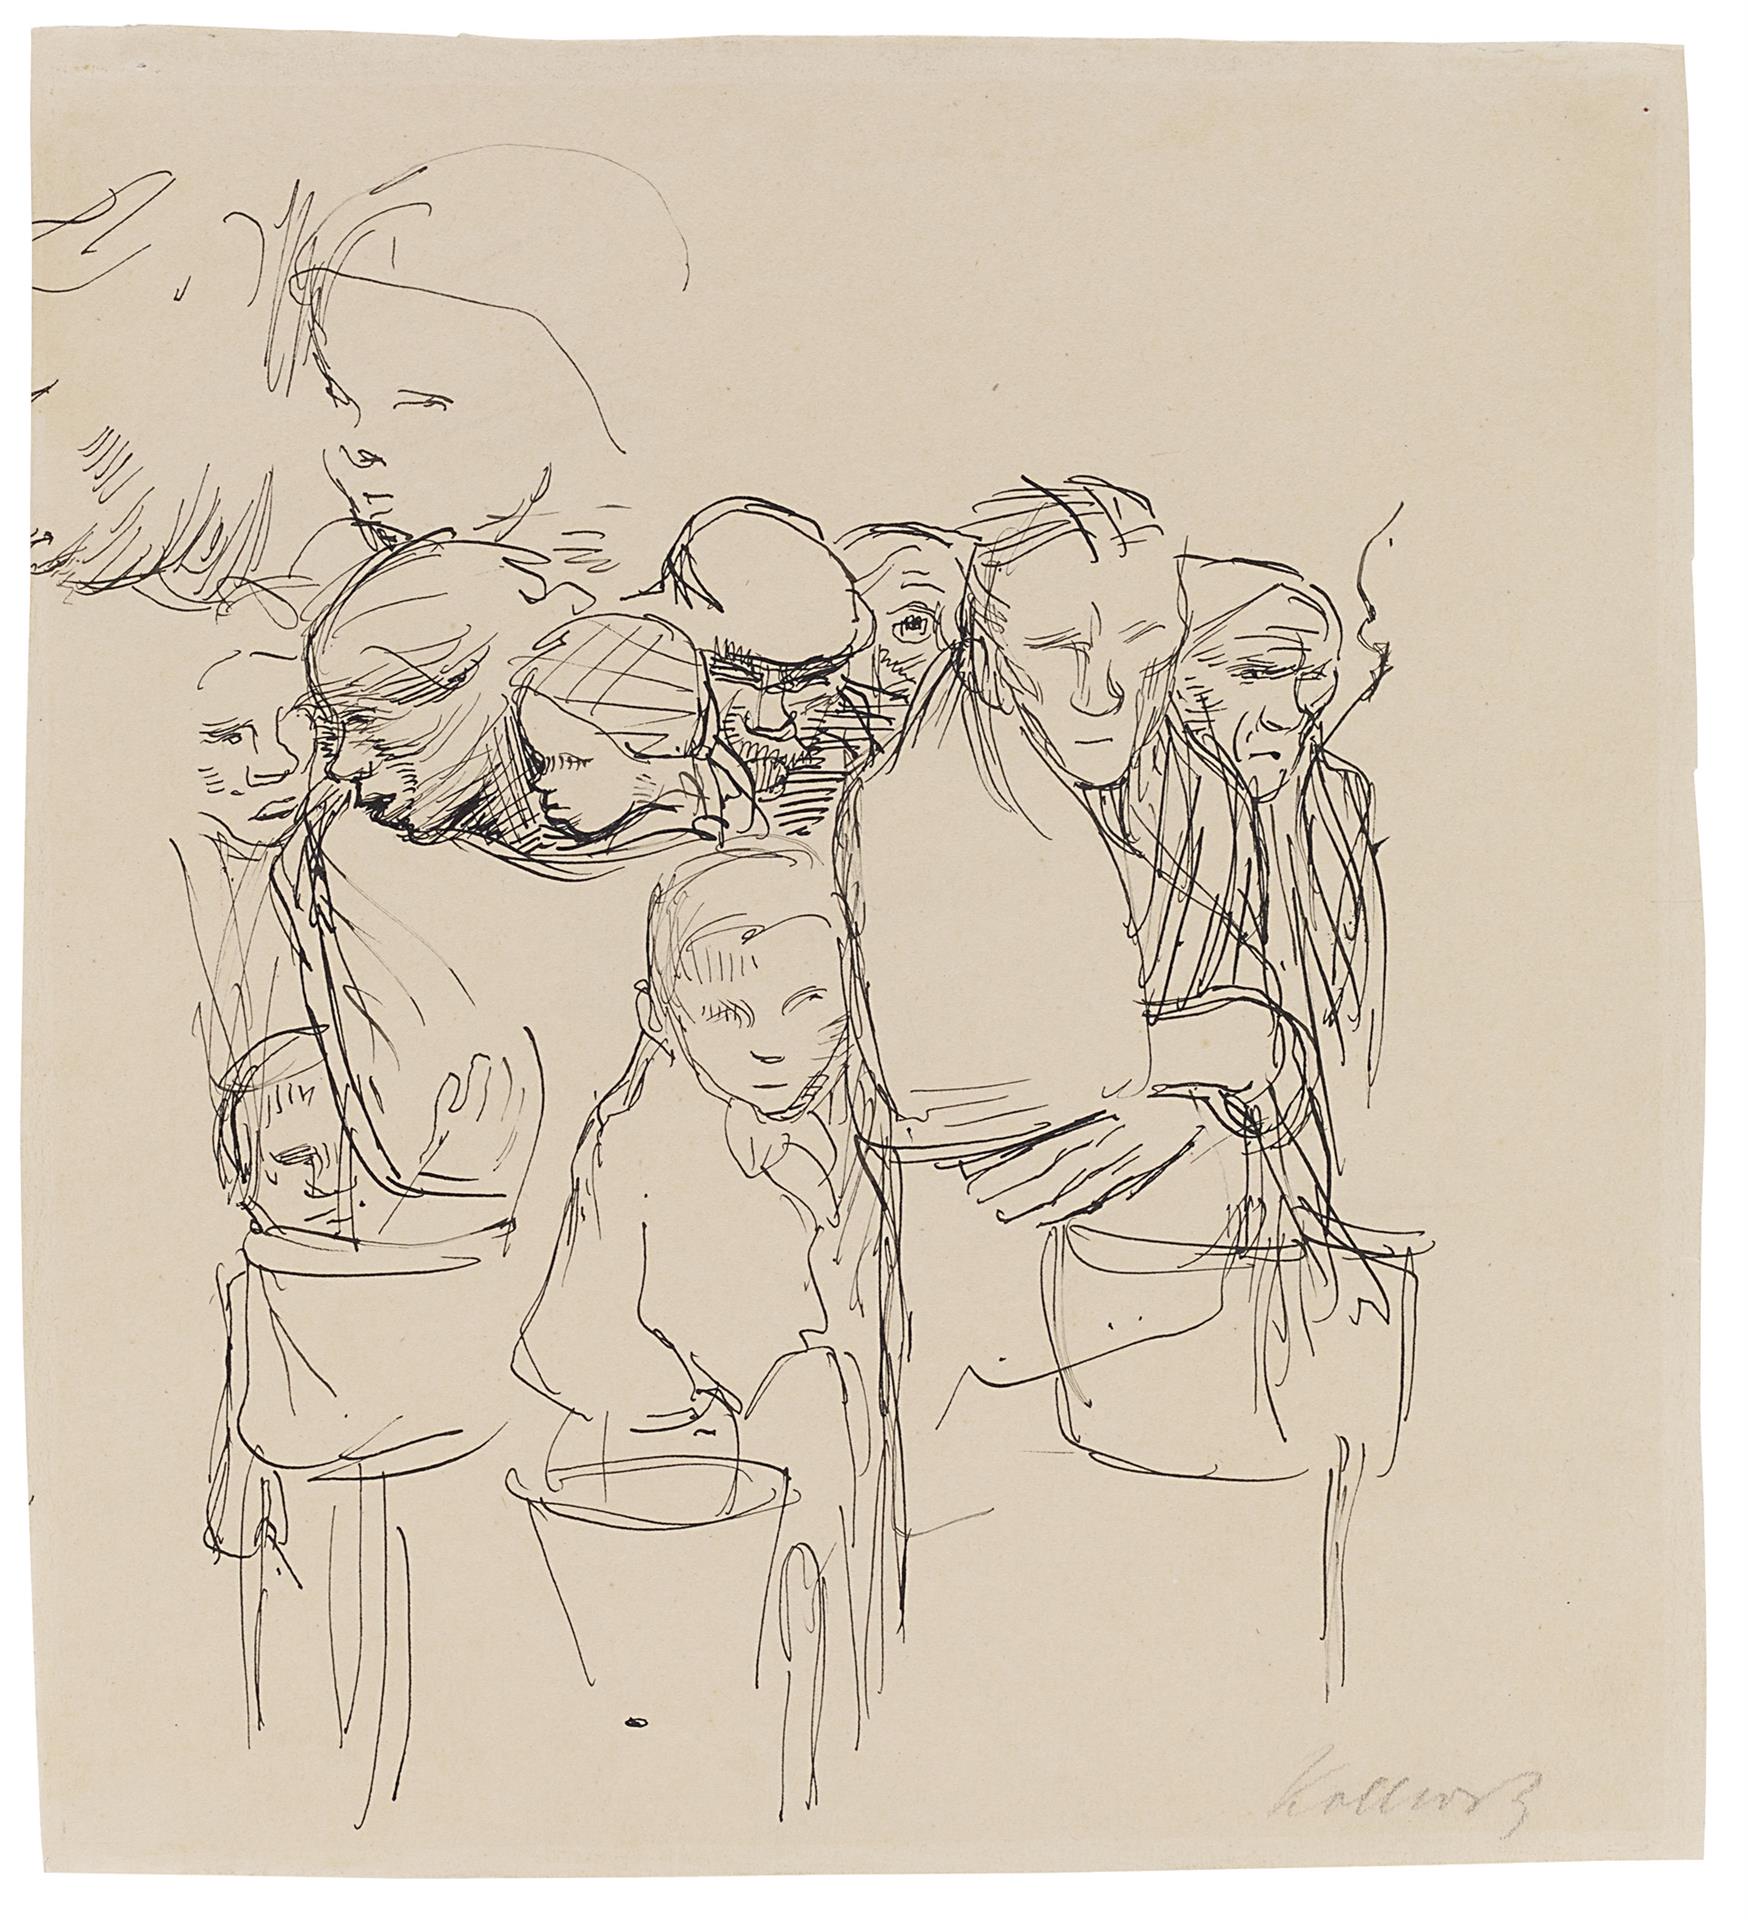 Käthe Kollwitz, Women and Children waiting to be given Food, 1918-1919, pen and ink on firm vellum, NT (794a), Cologne Kollwitz Collection © Käthe Kollwitz Museum Köln